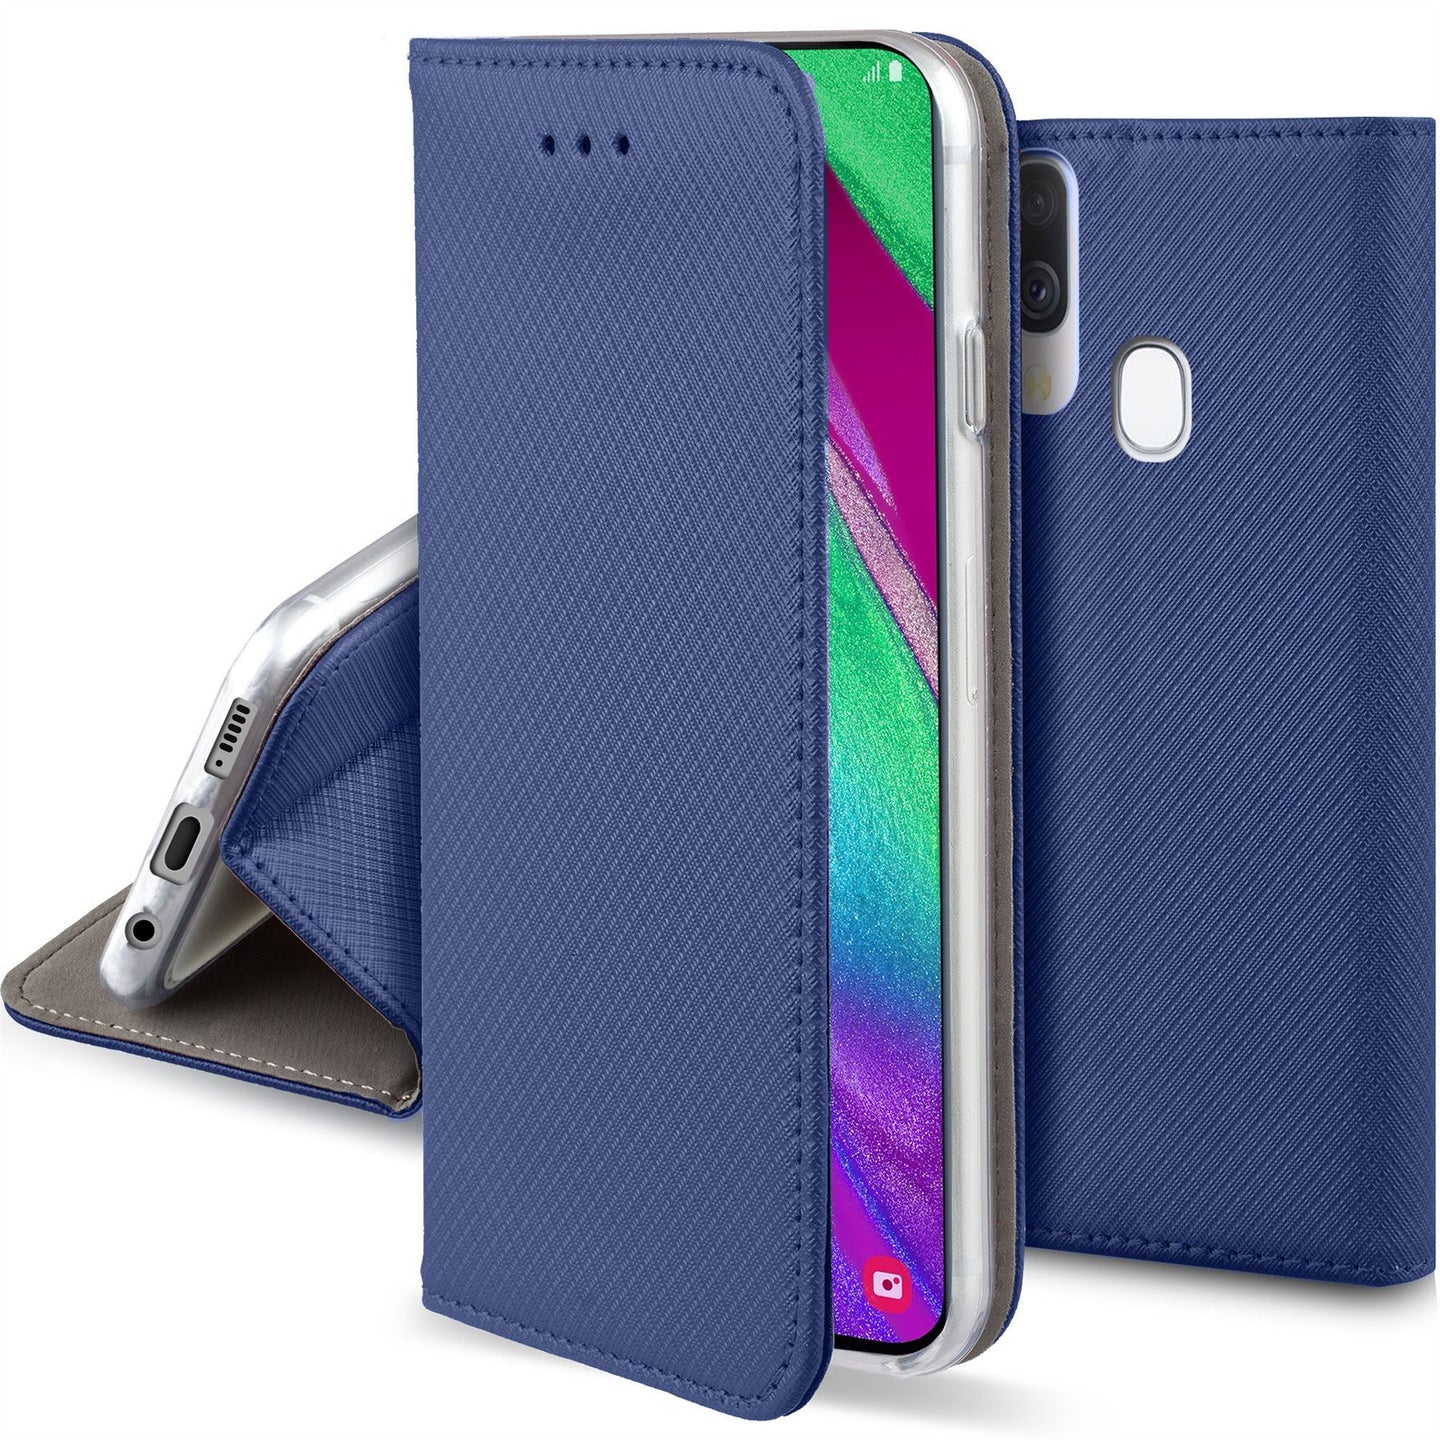 Moozy Case Flip Cover for Samsung A40, Dark Blue - Smart Magnetic Flip Case with Card Holder and Stand